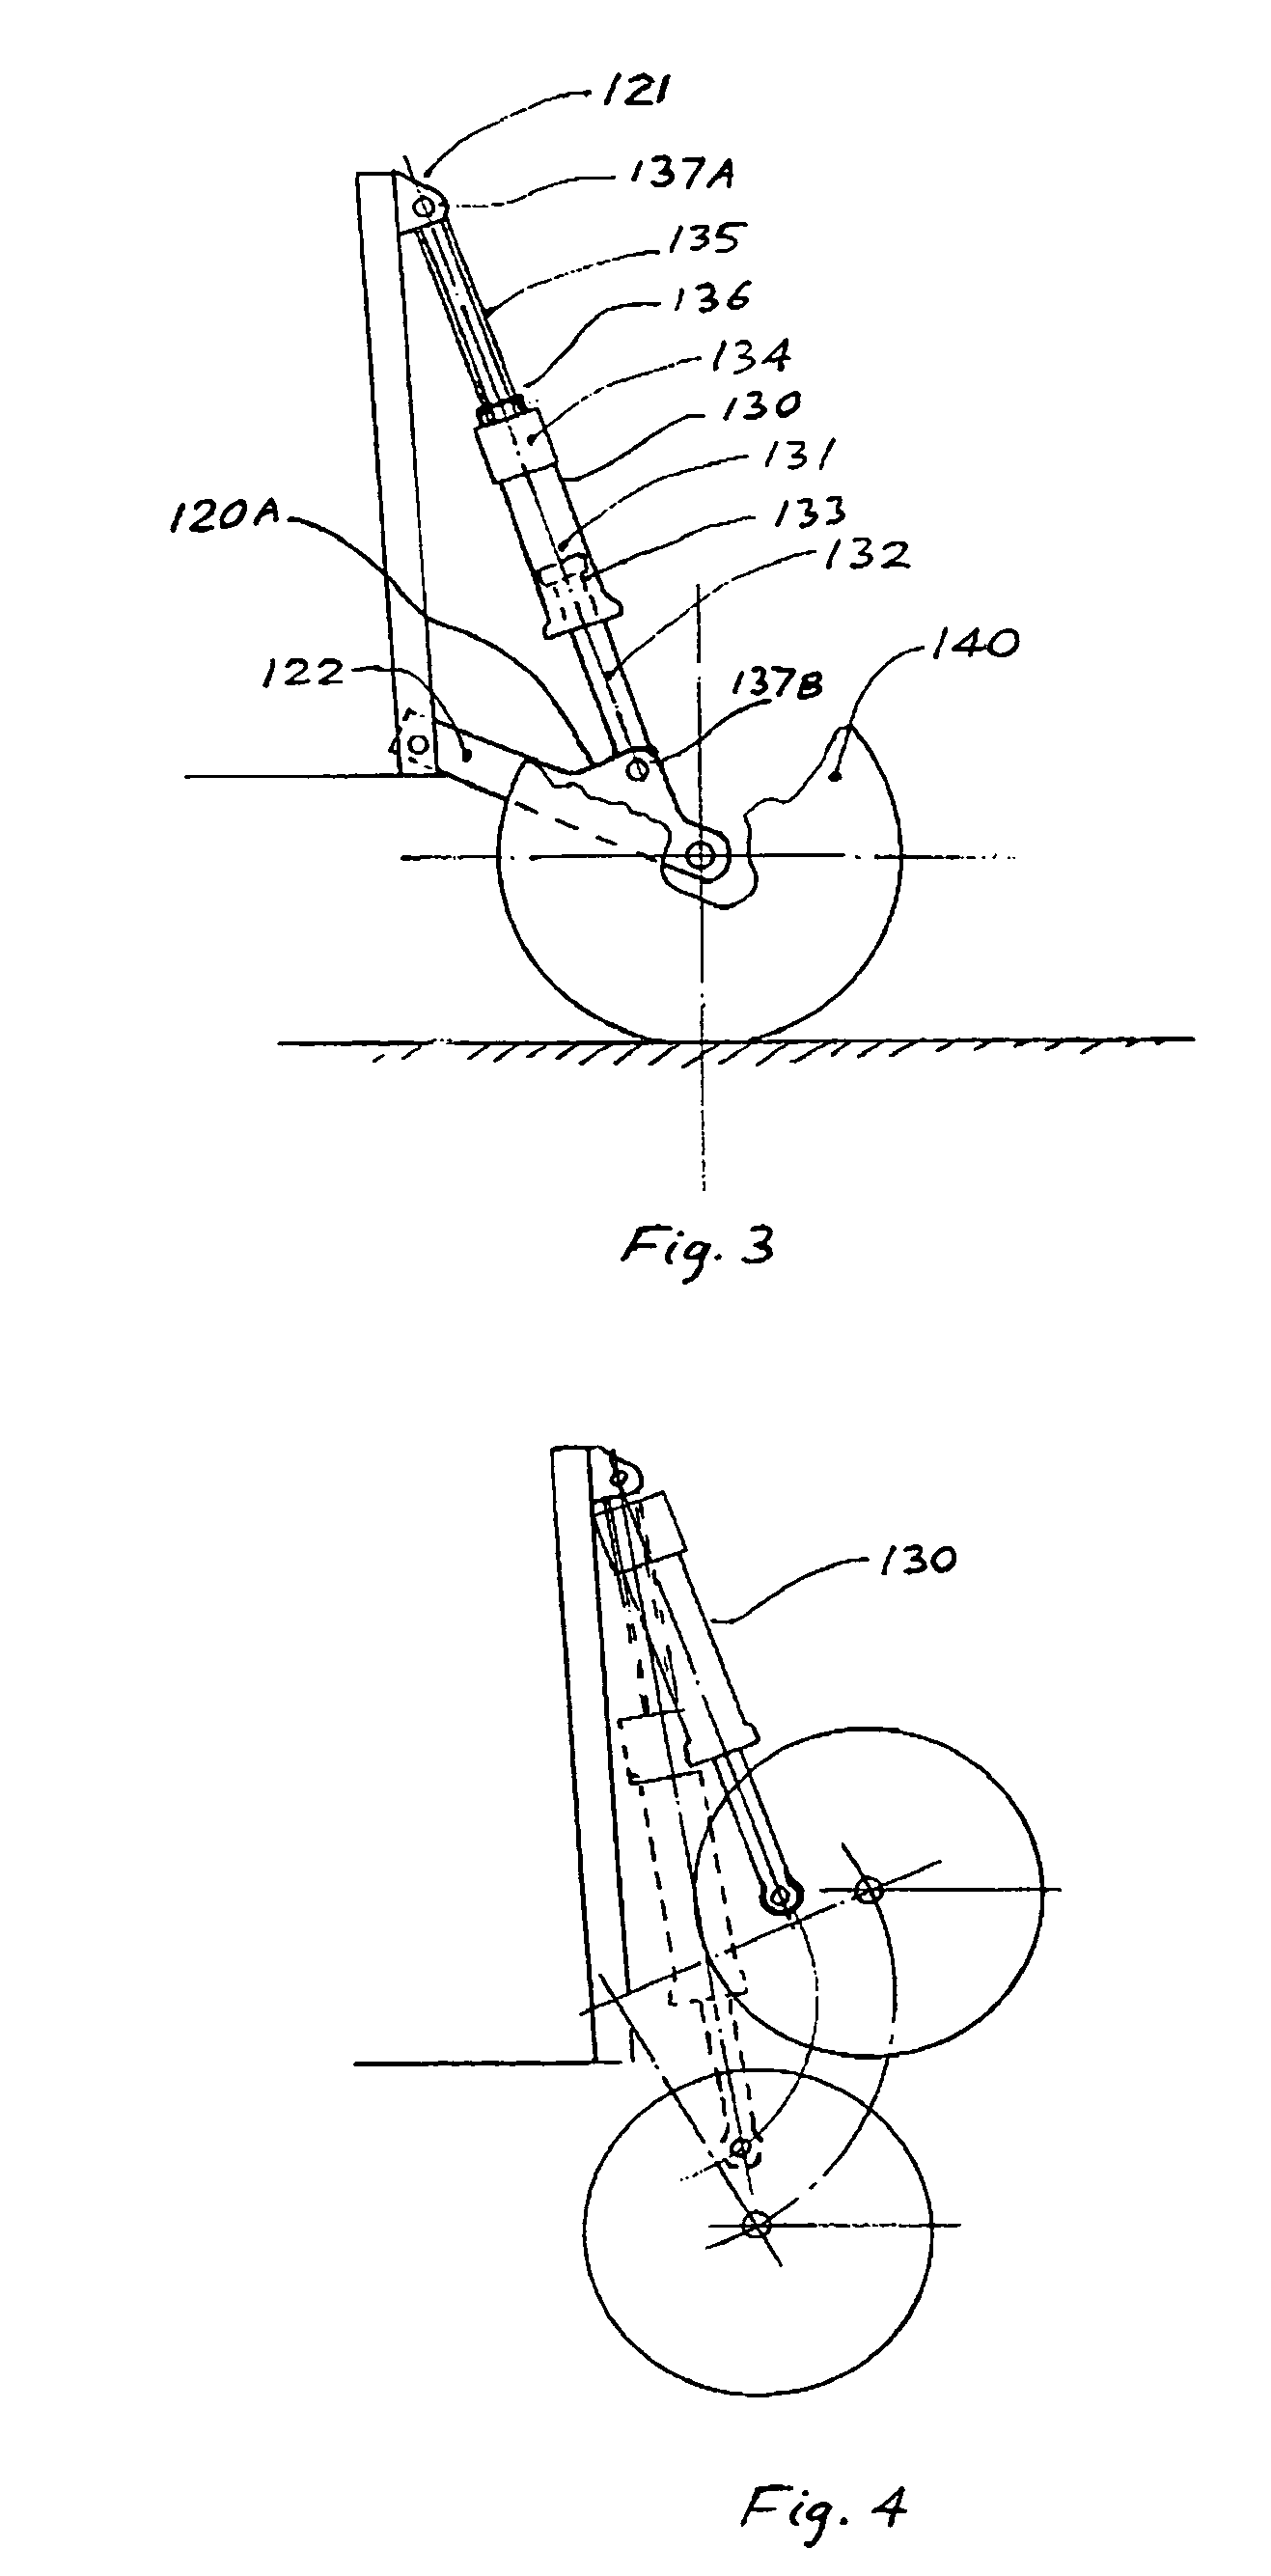 Aircraft landing gear with integrated extension, retraction, and leveling feature